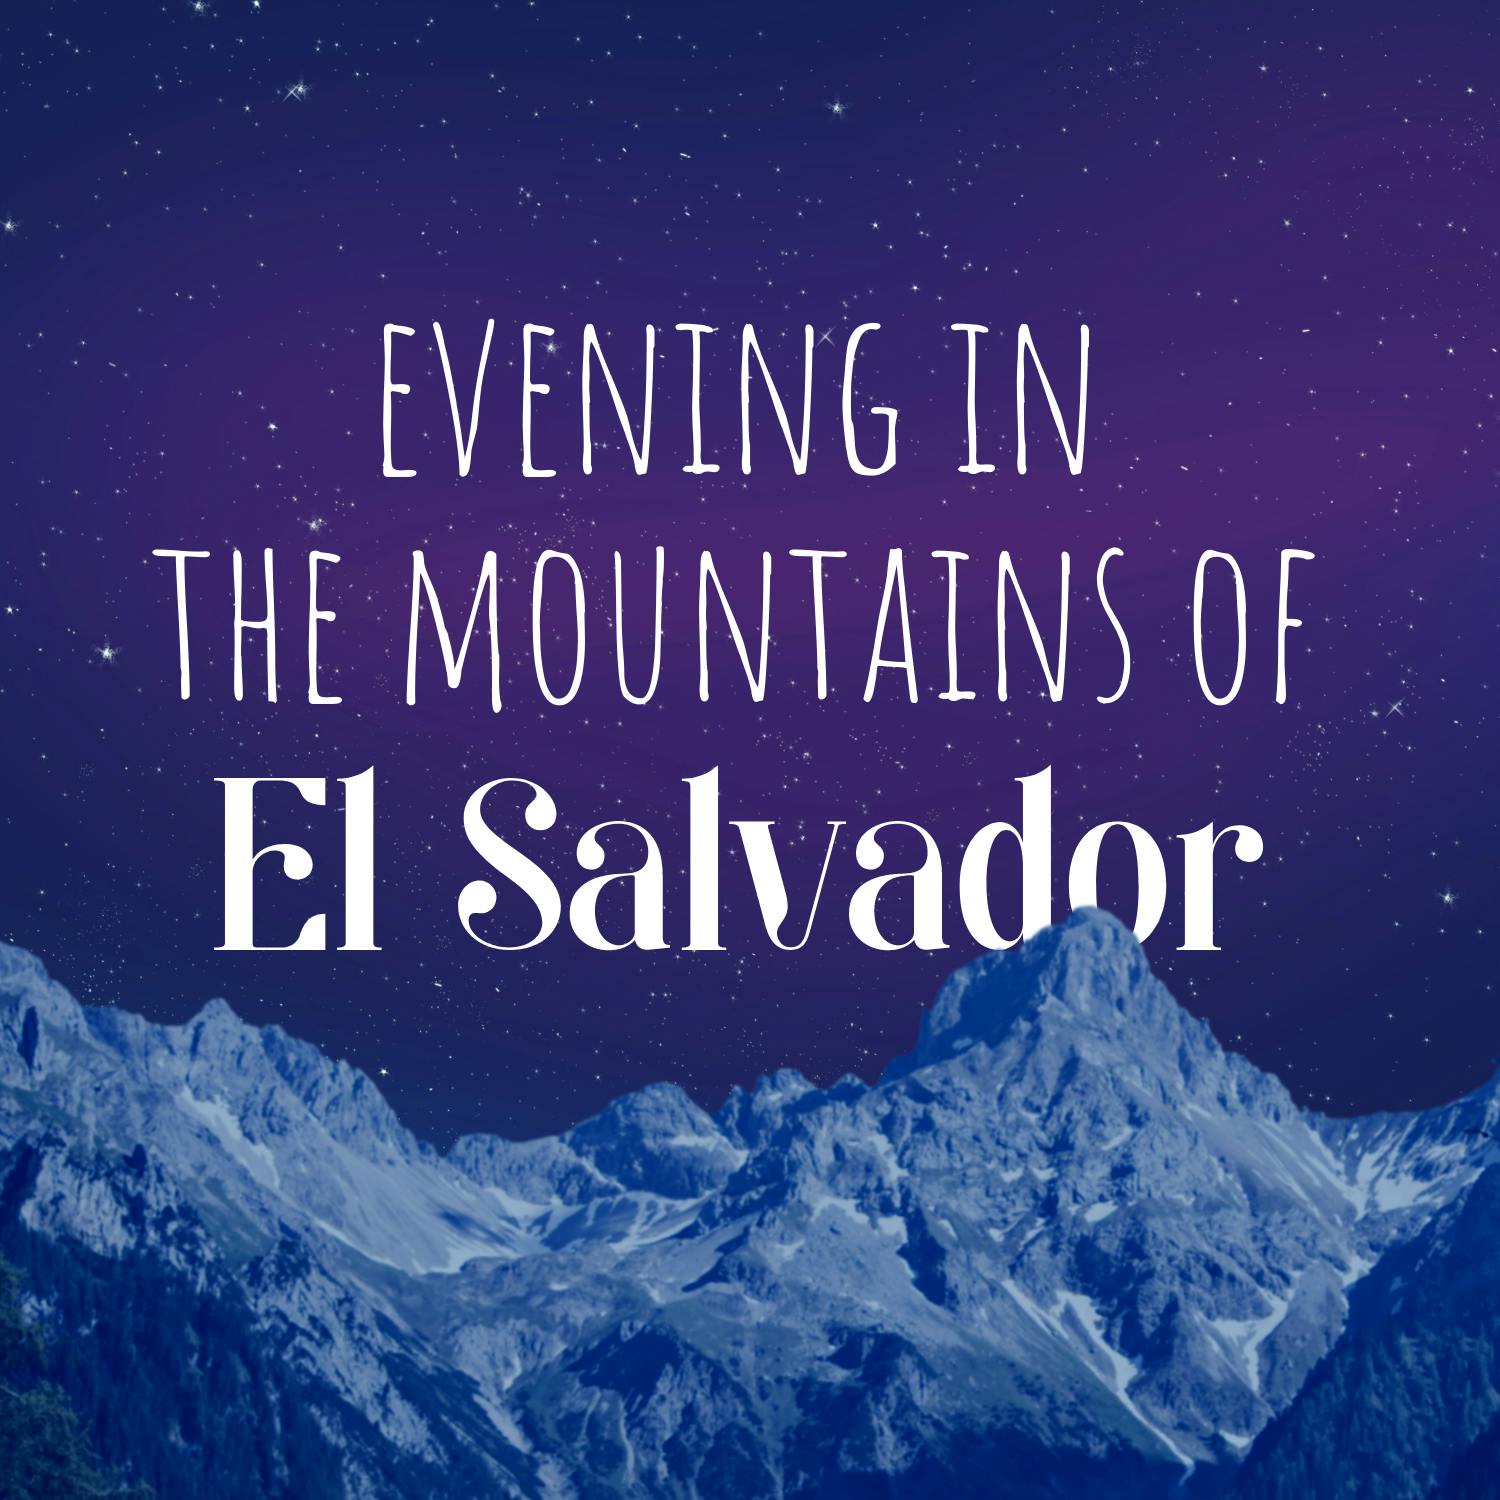 Evening in the Mountains of El Salvador